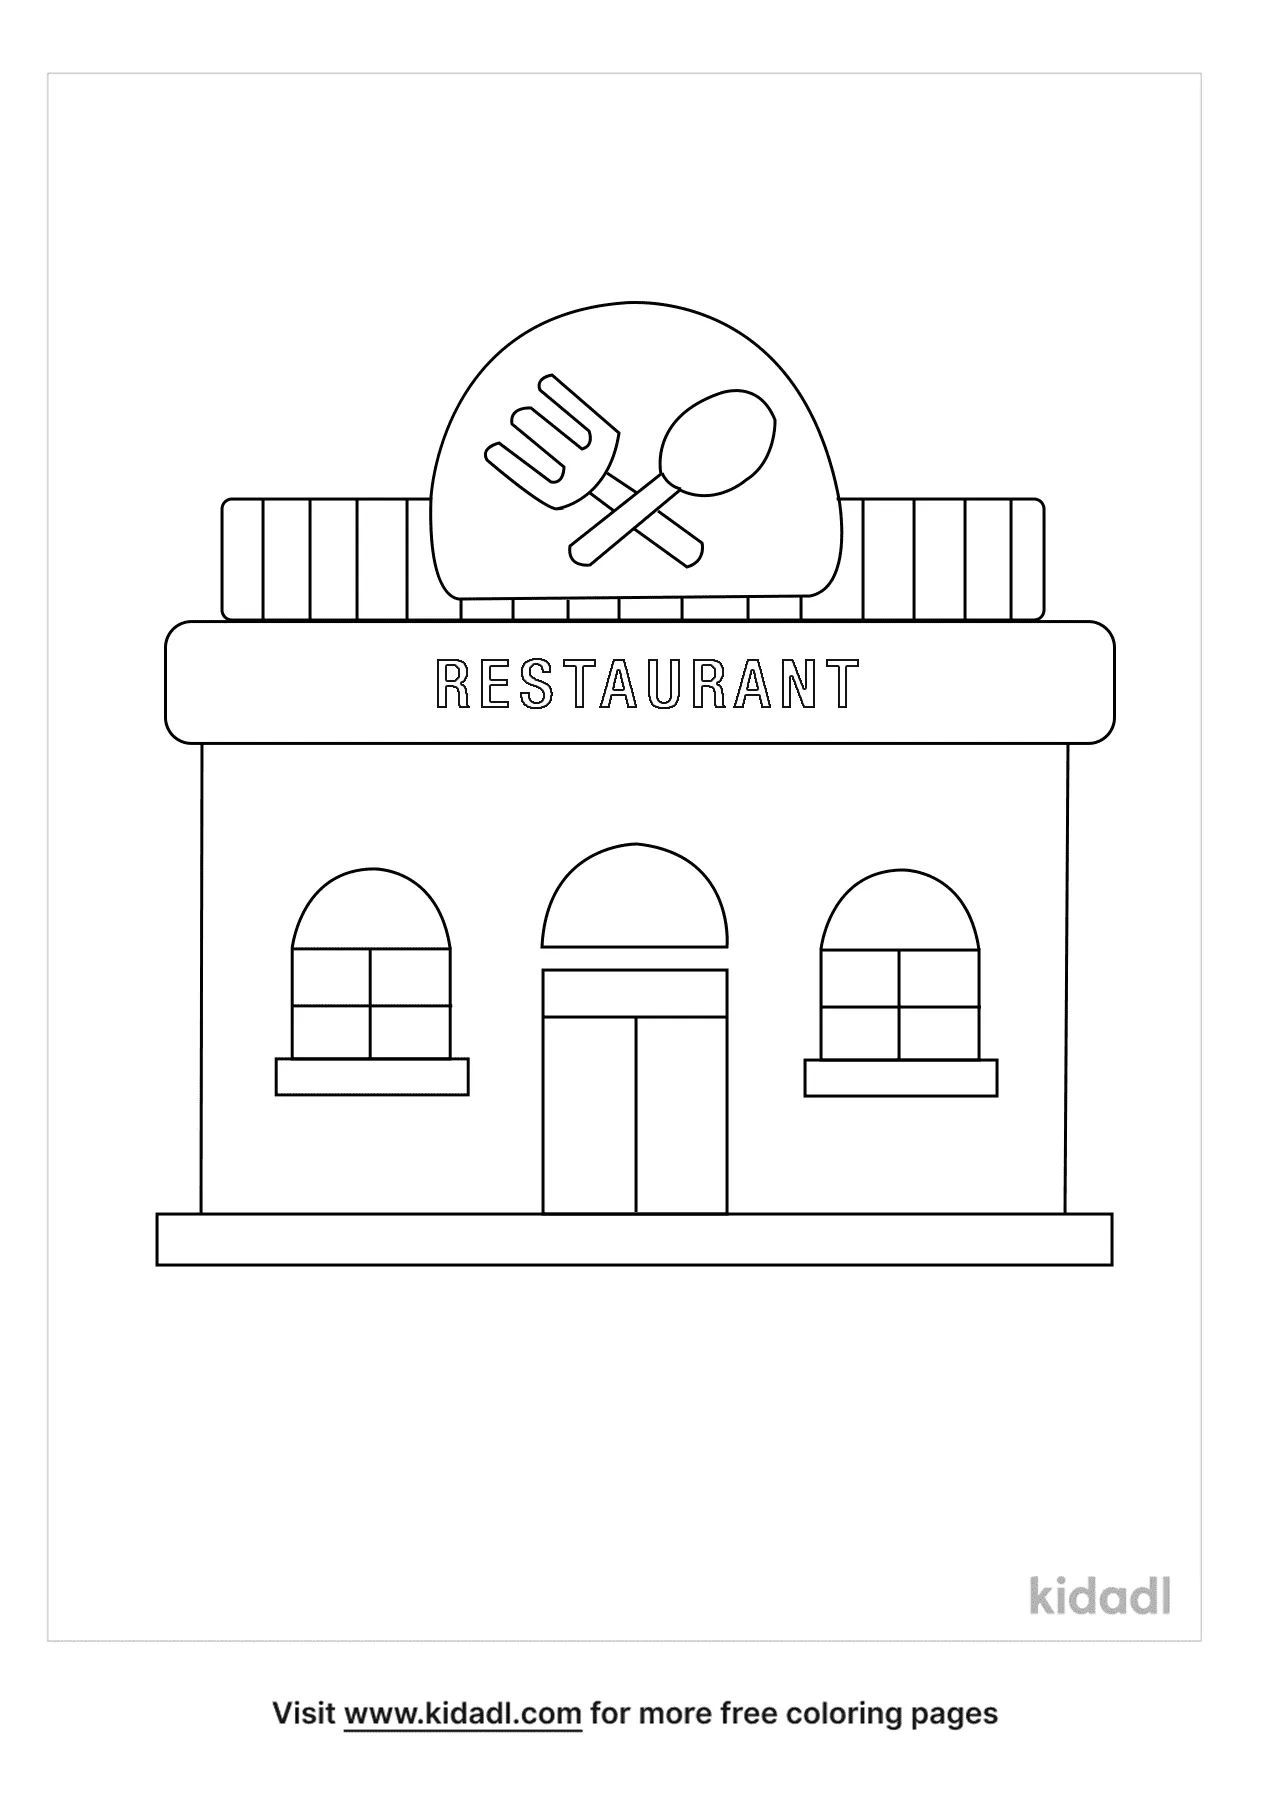 Free restaurant coloring page coloring page printables